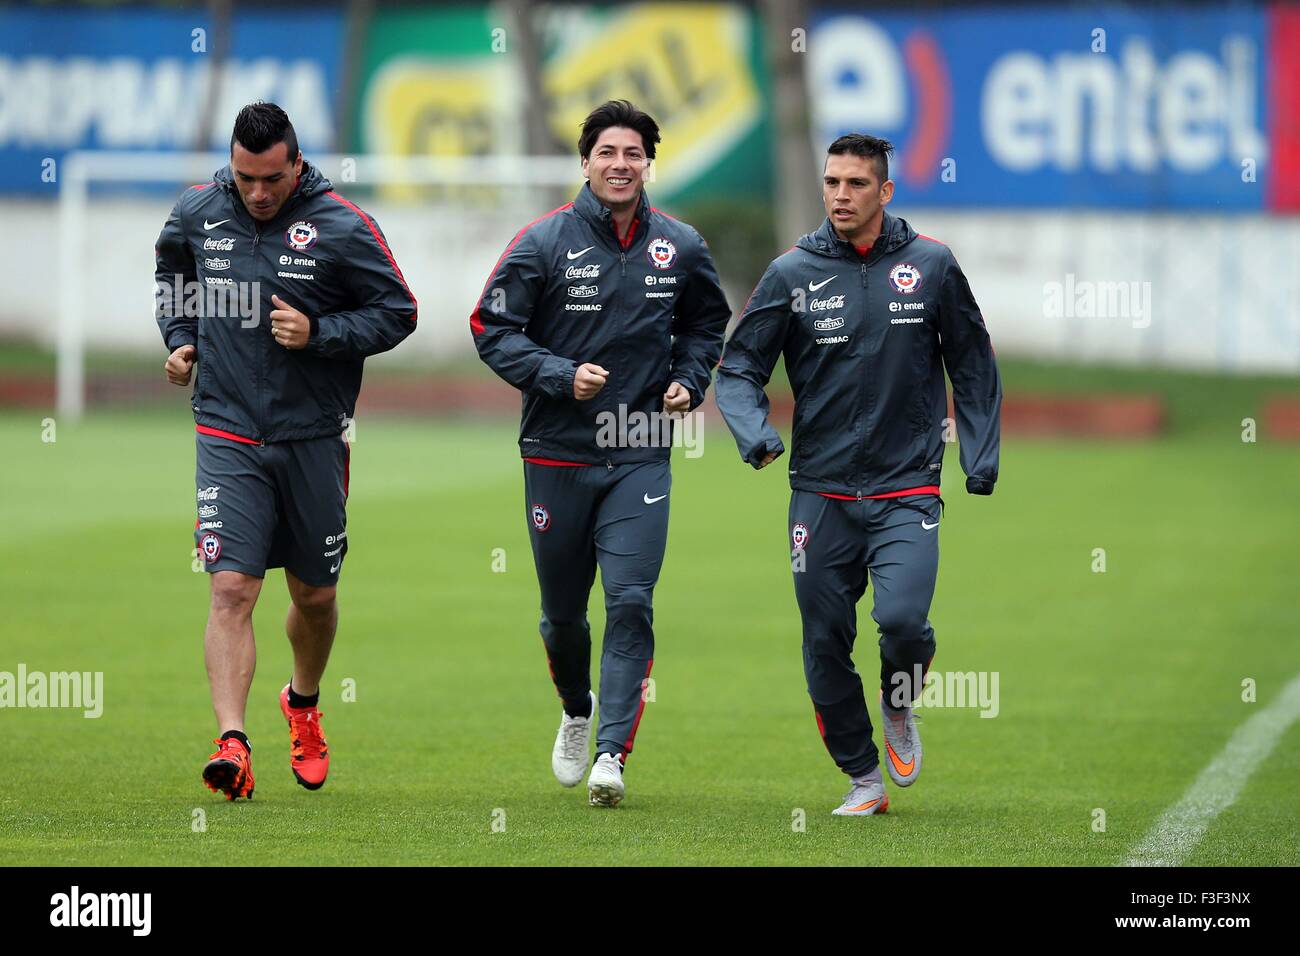 Santiago, Chile. 6th Oct, 2015. Chile national soccer team players Esteban Paredes (L), Jaime Valdes (C) and Mark Gonzalez (R), take part in a training session at Juan Pinto Duran Sports Complex, in Santiago city, capital of Chile, Oct. 6, 2015. Chile soccer team took part in a training session facing its qualifying match against Brazil heading to World Cup Russia 2018, which will be played on Oct. 8 at the Santiago National Stadium. © ANFP/Xinhua/Alamy Live News Stock Photo